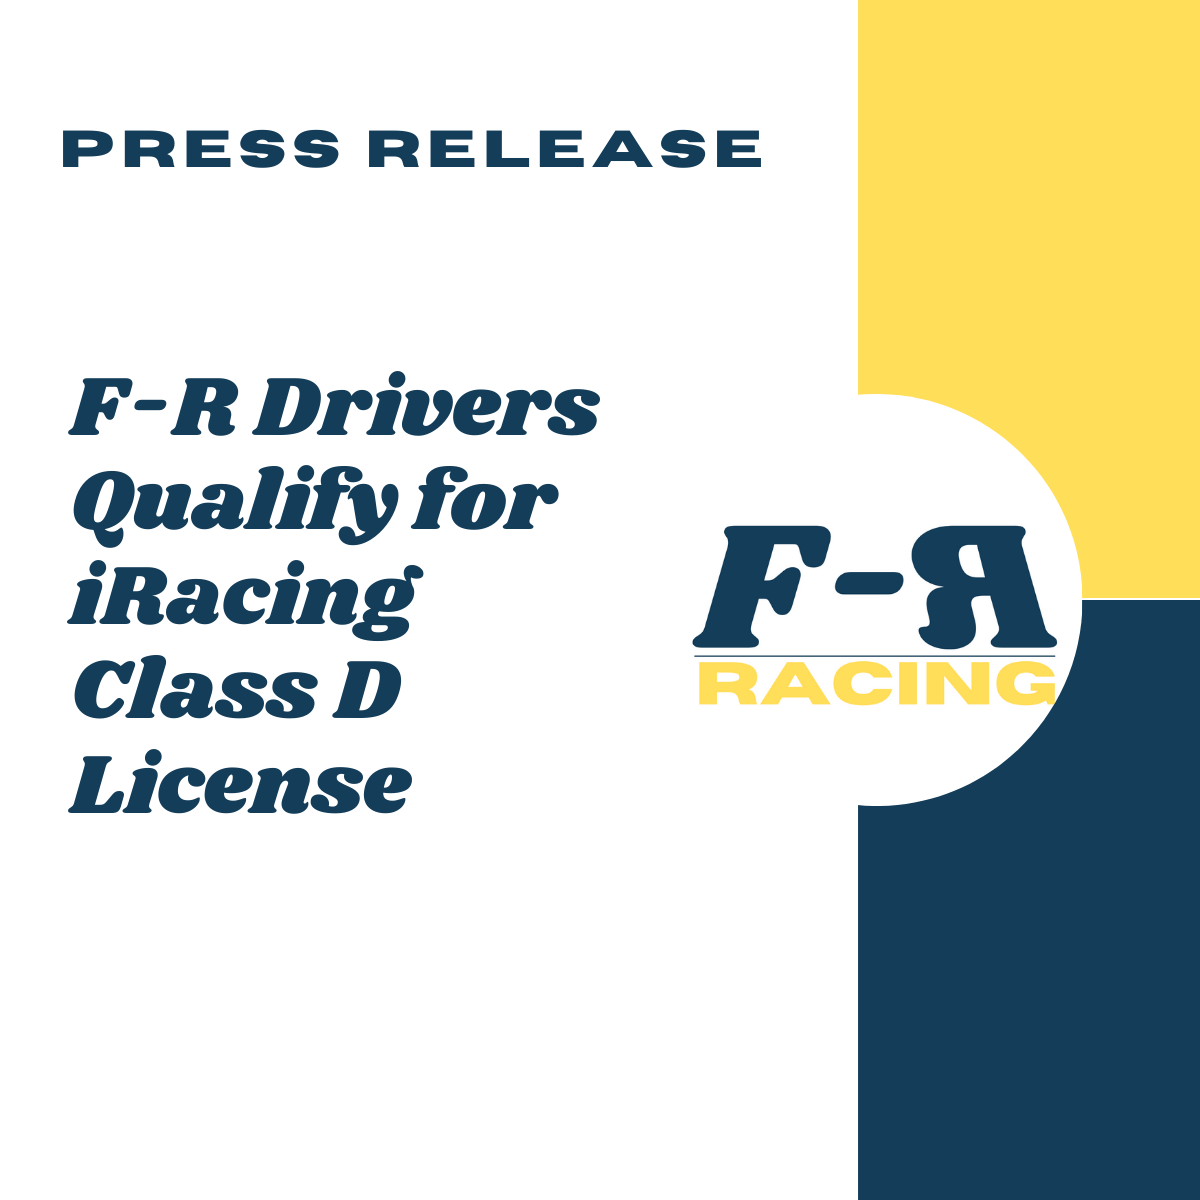 F-R Drivers Qualify For iRacing Class D License